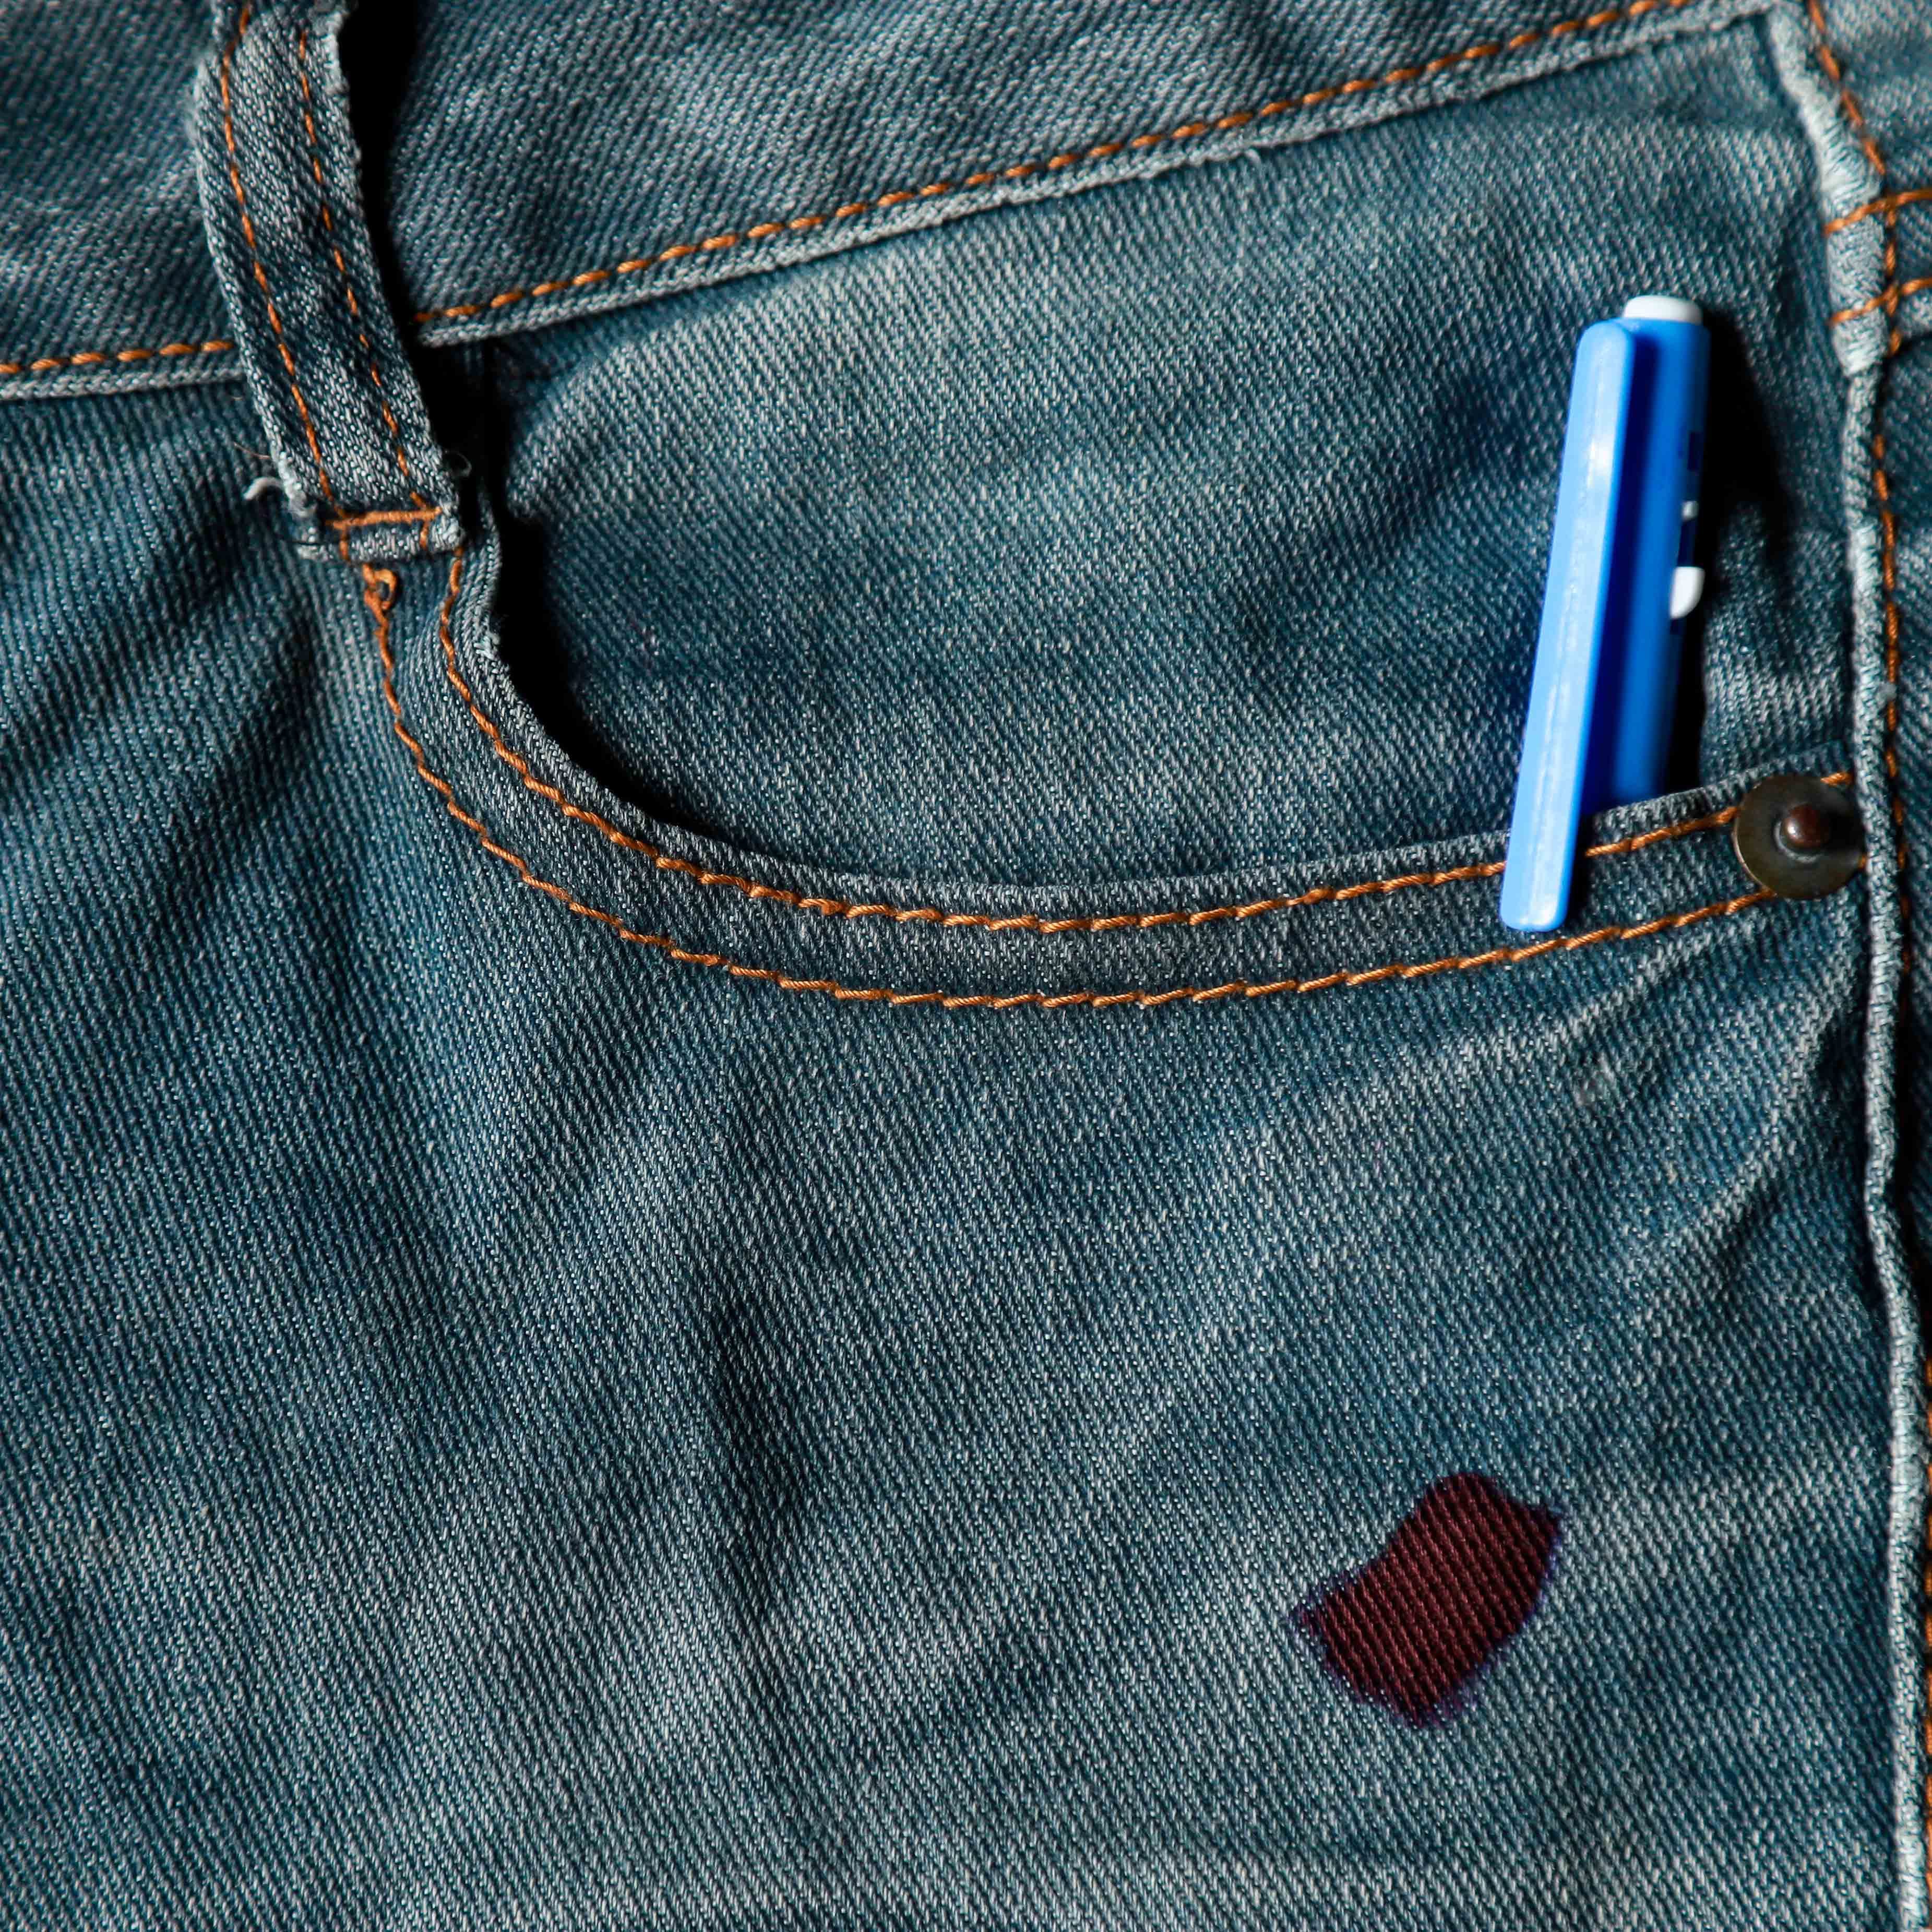 How To Remove Ink From Clothes Family Handyman